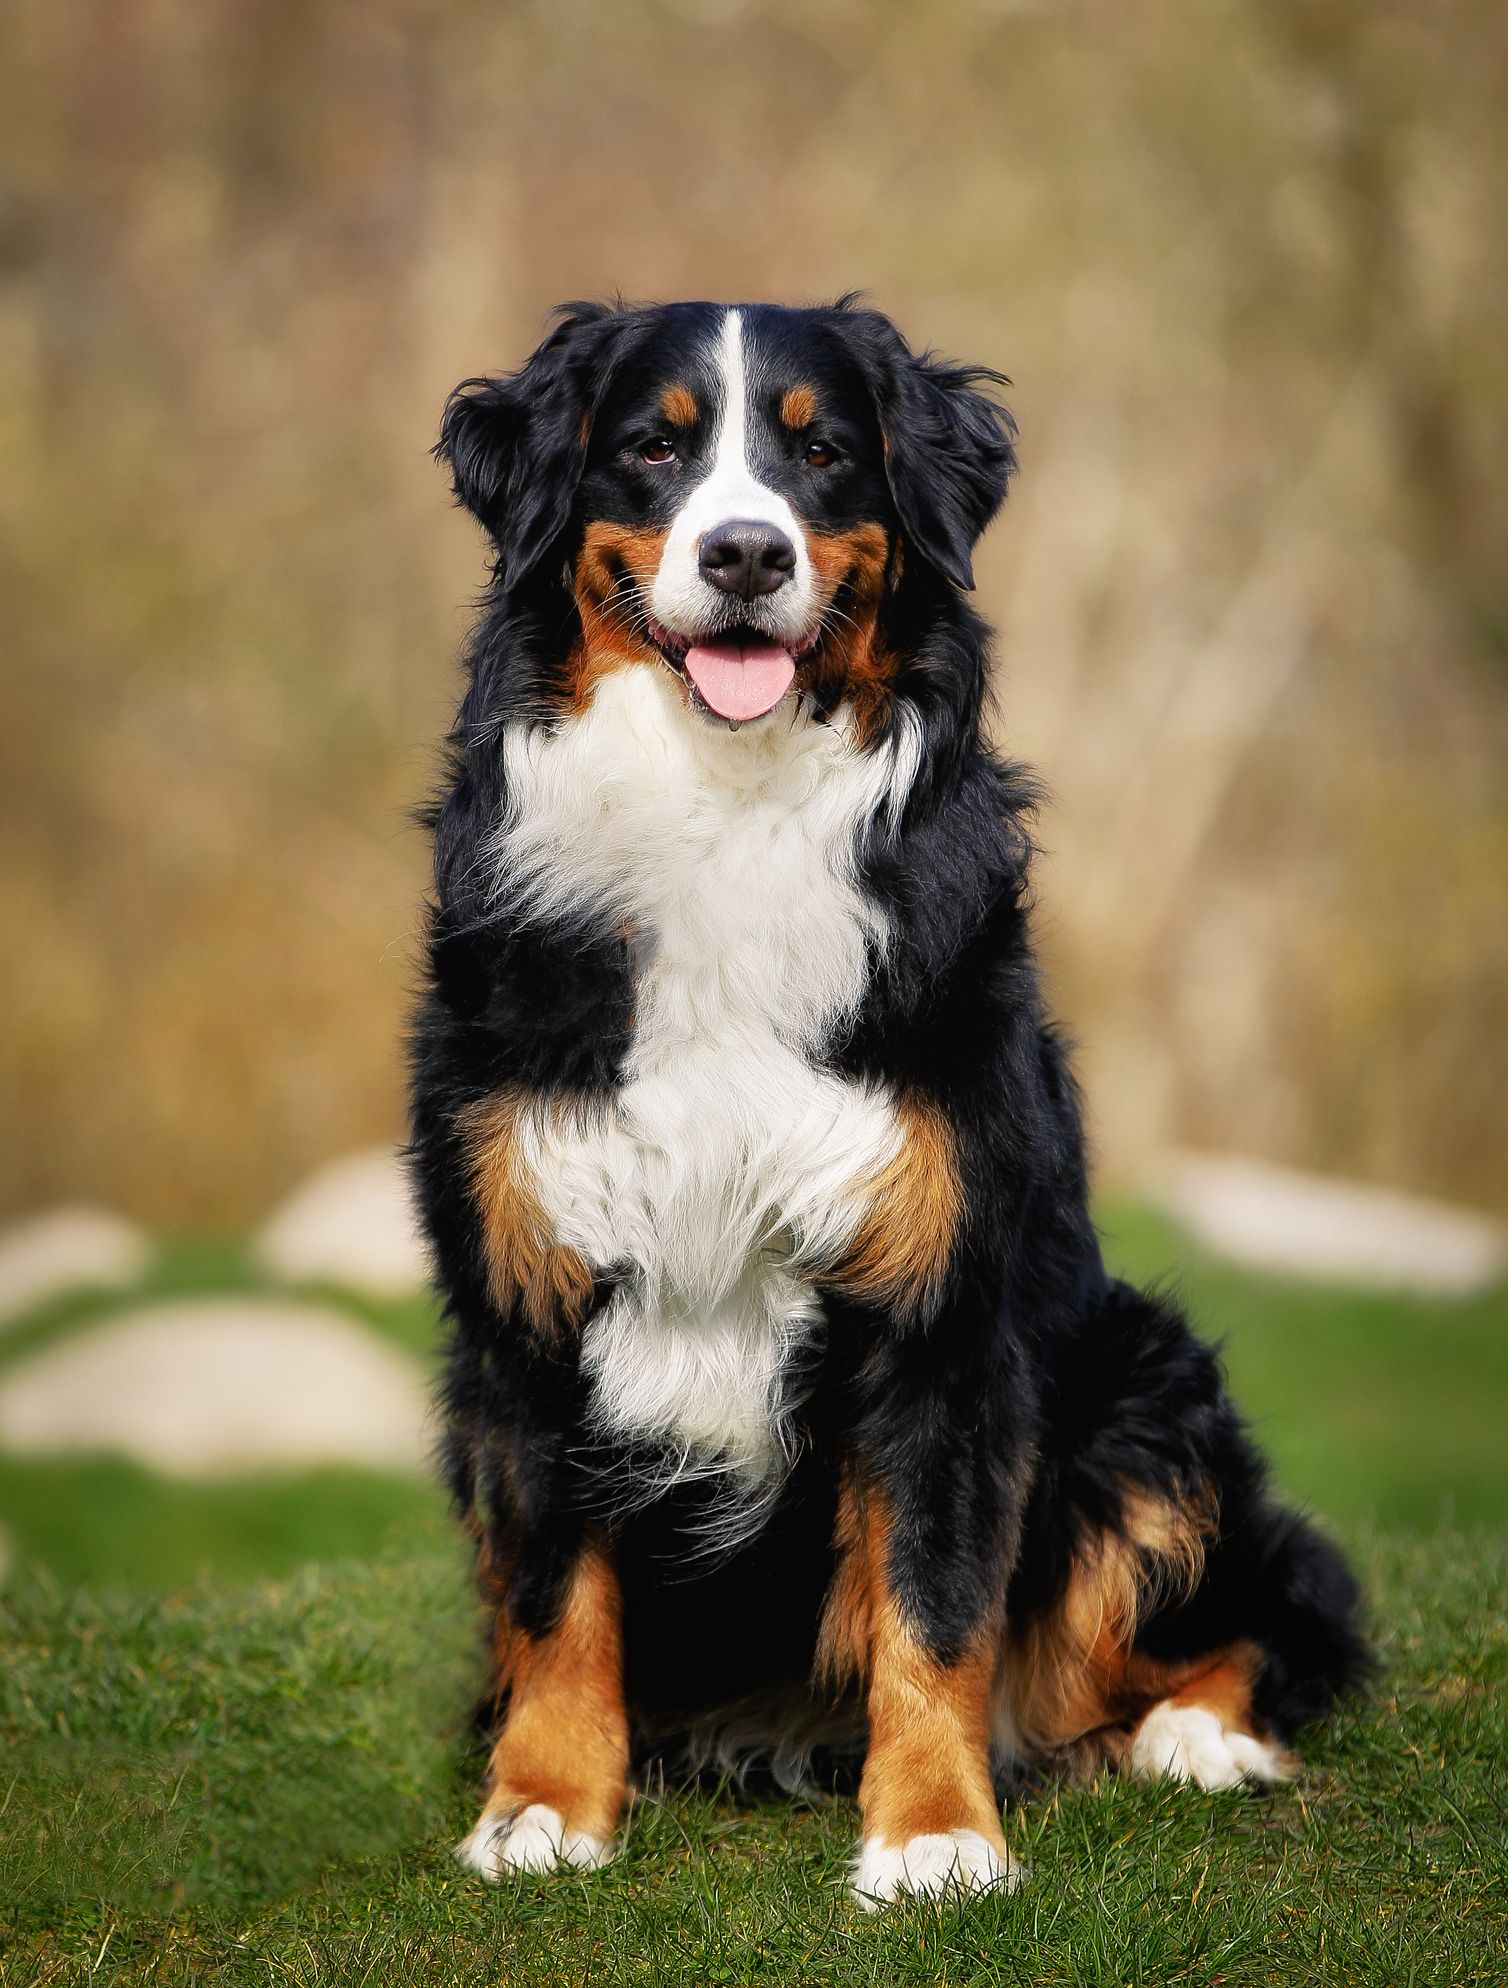 20 Best Dogs Breeds That Are Good For Kids And Families